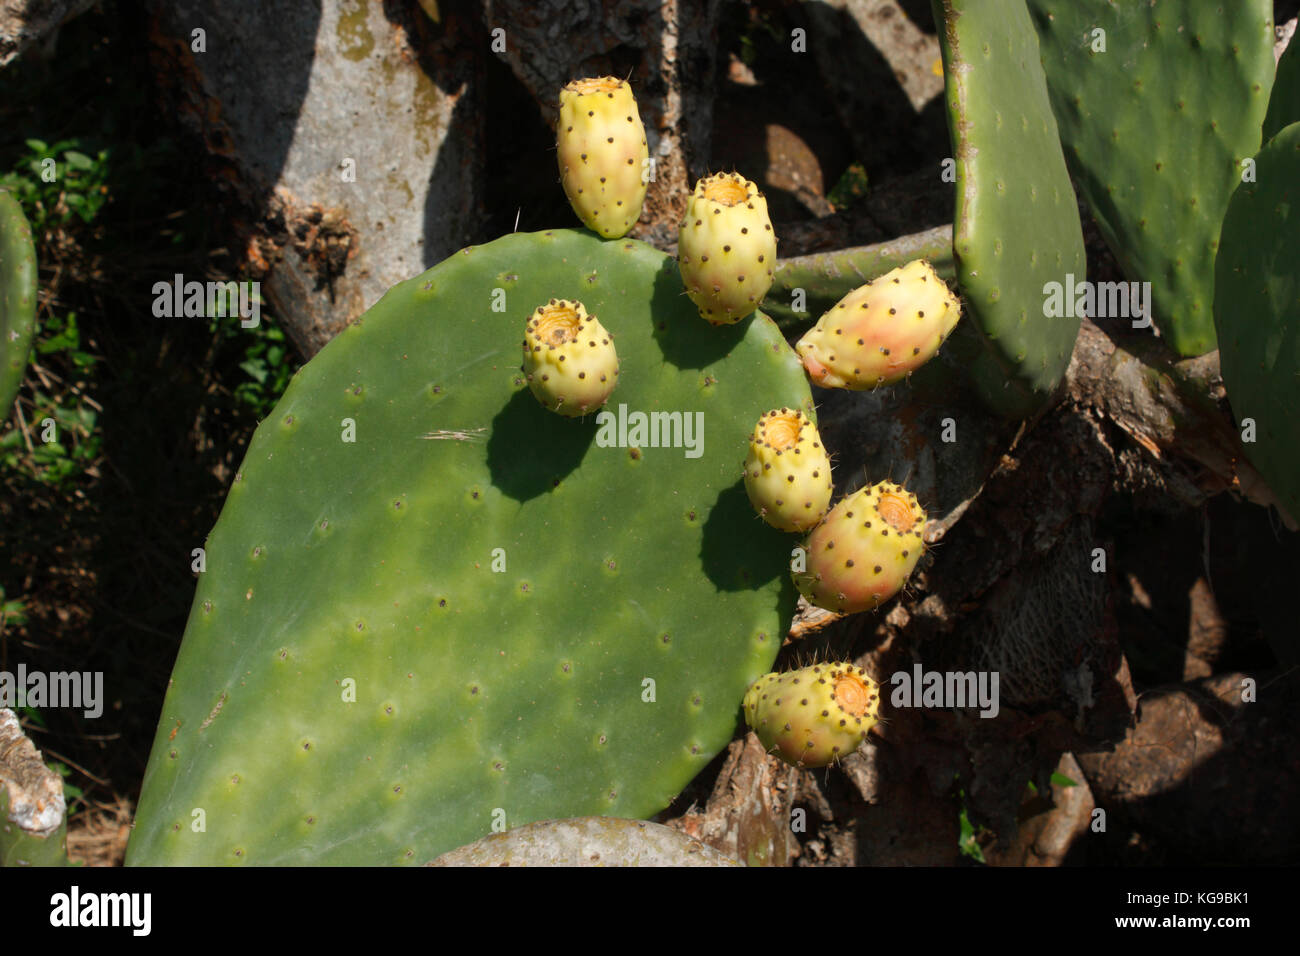 Prickly pear (opuntia ficus-indica) tree leaf with fruit Stock Photo